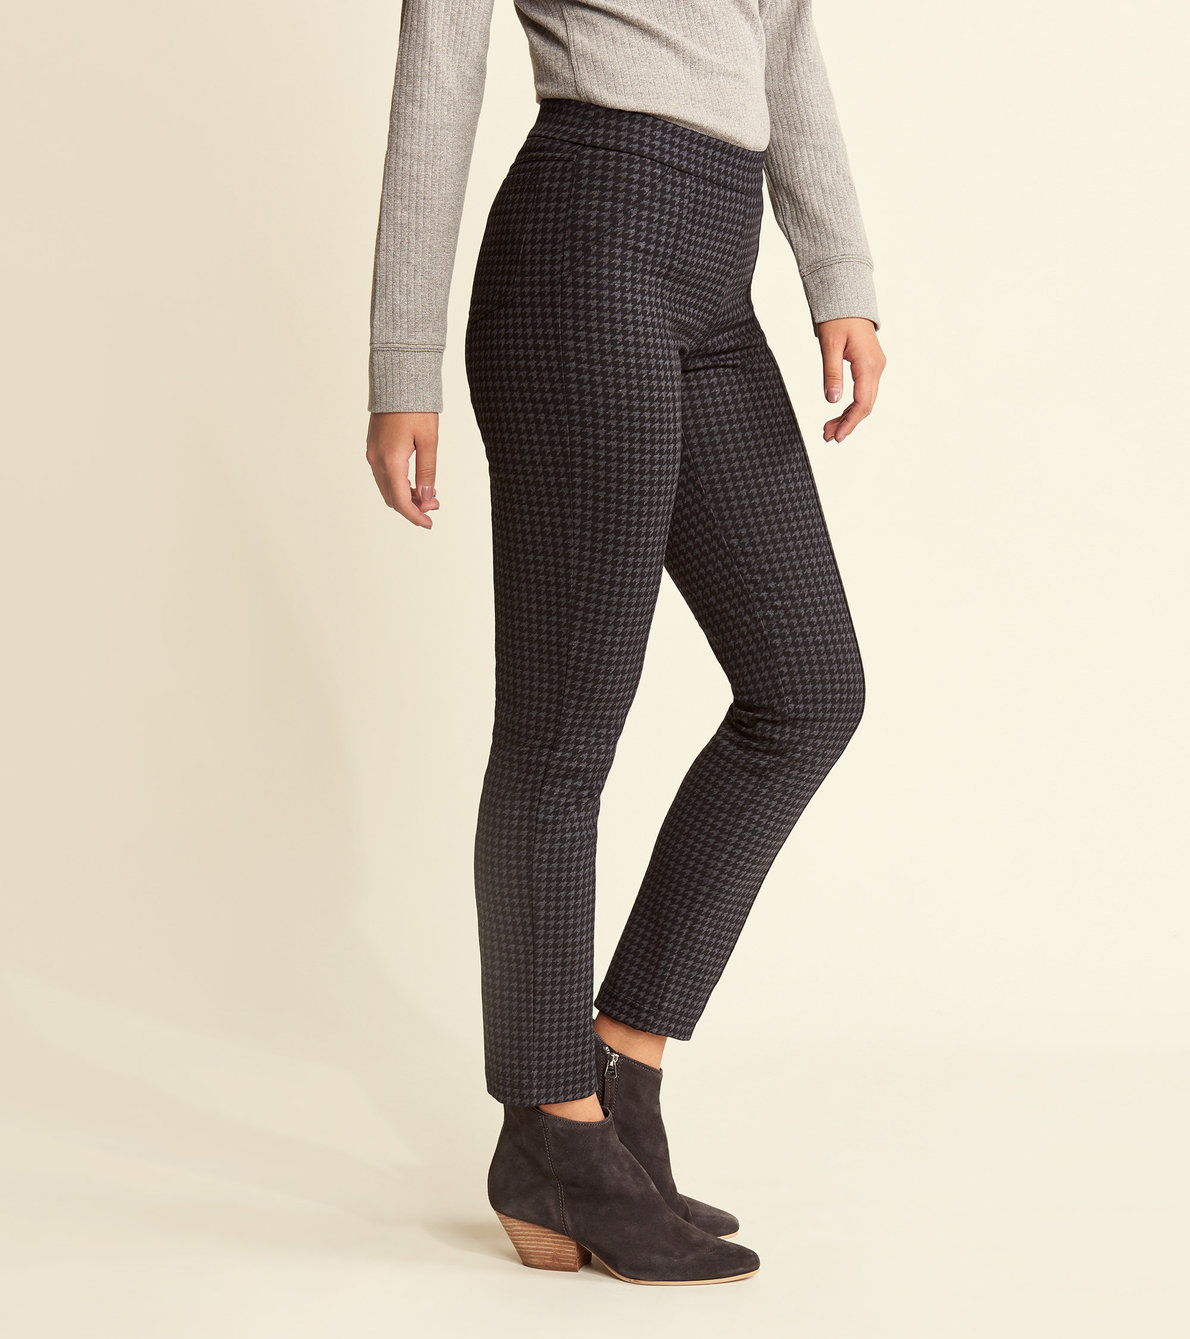 View larger image of Kate Ponte Pants - Houndstooth